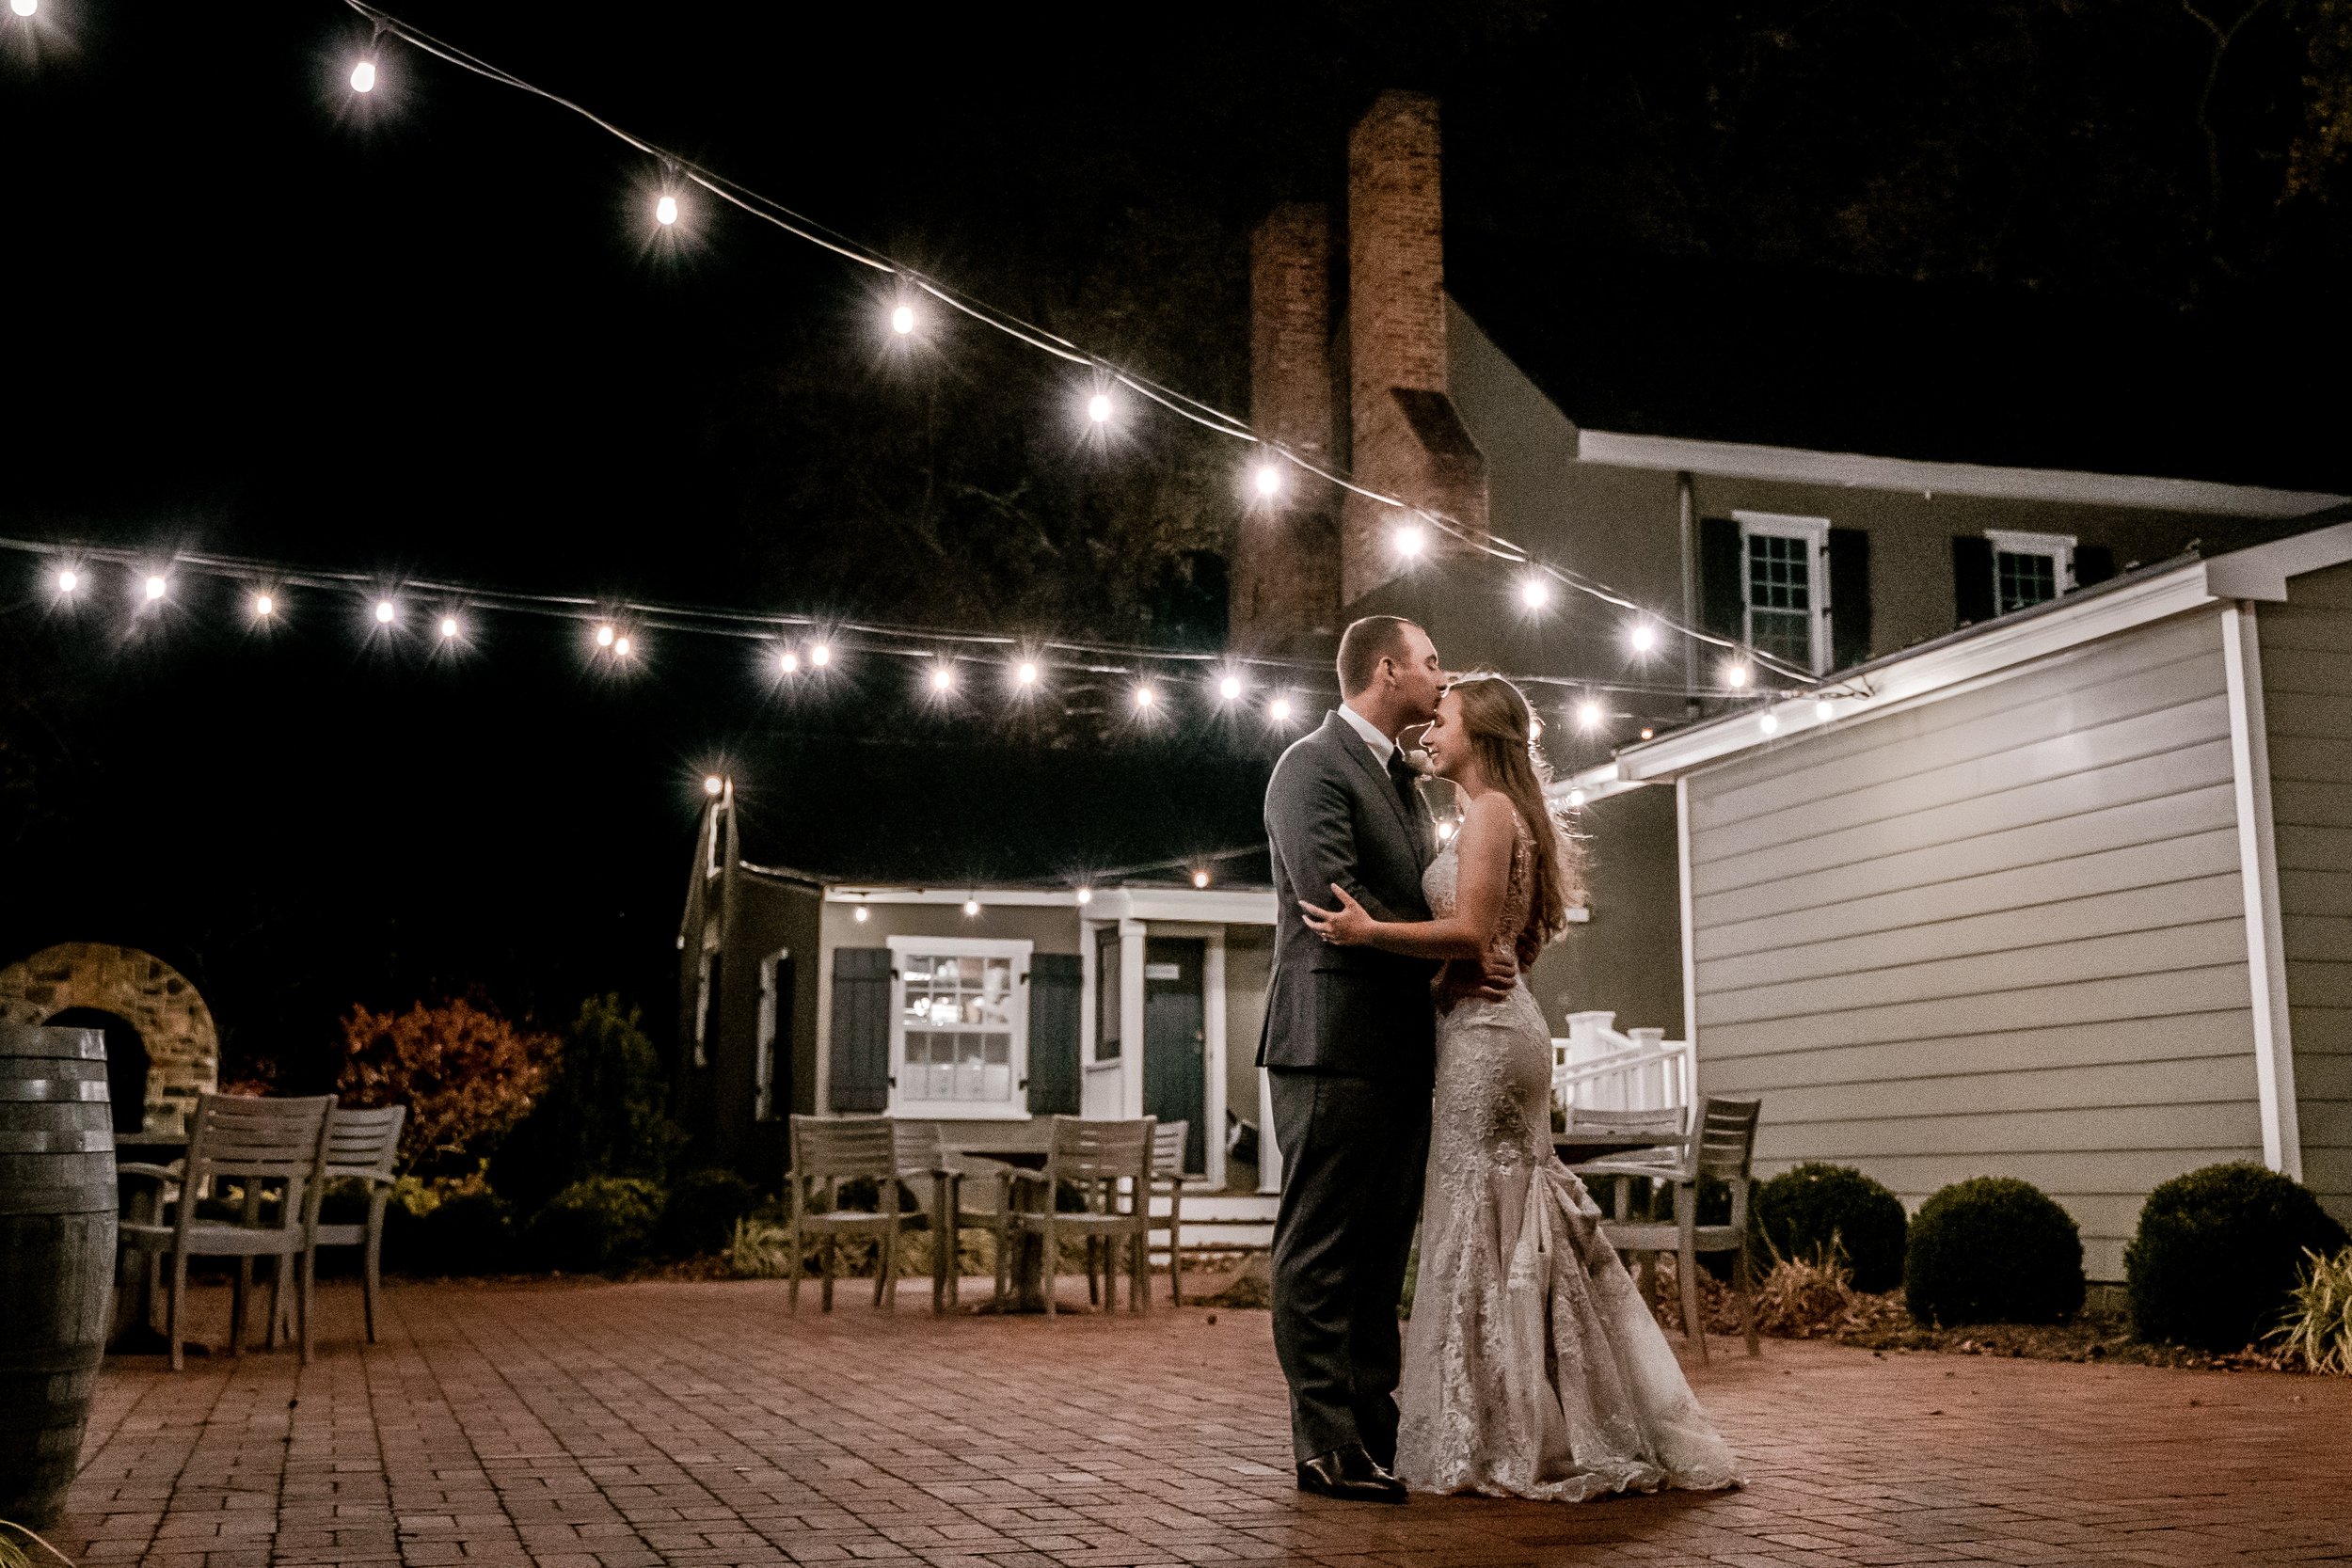 A bride and groom pose for a night portrait under string lights during their wedding at Fleetwood Farm Winery in Leesburg Virginia